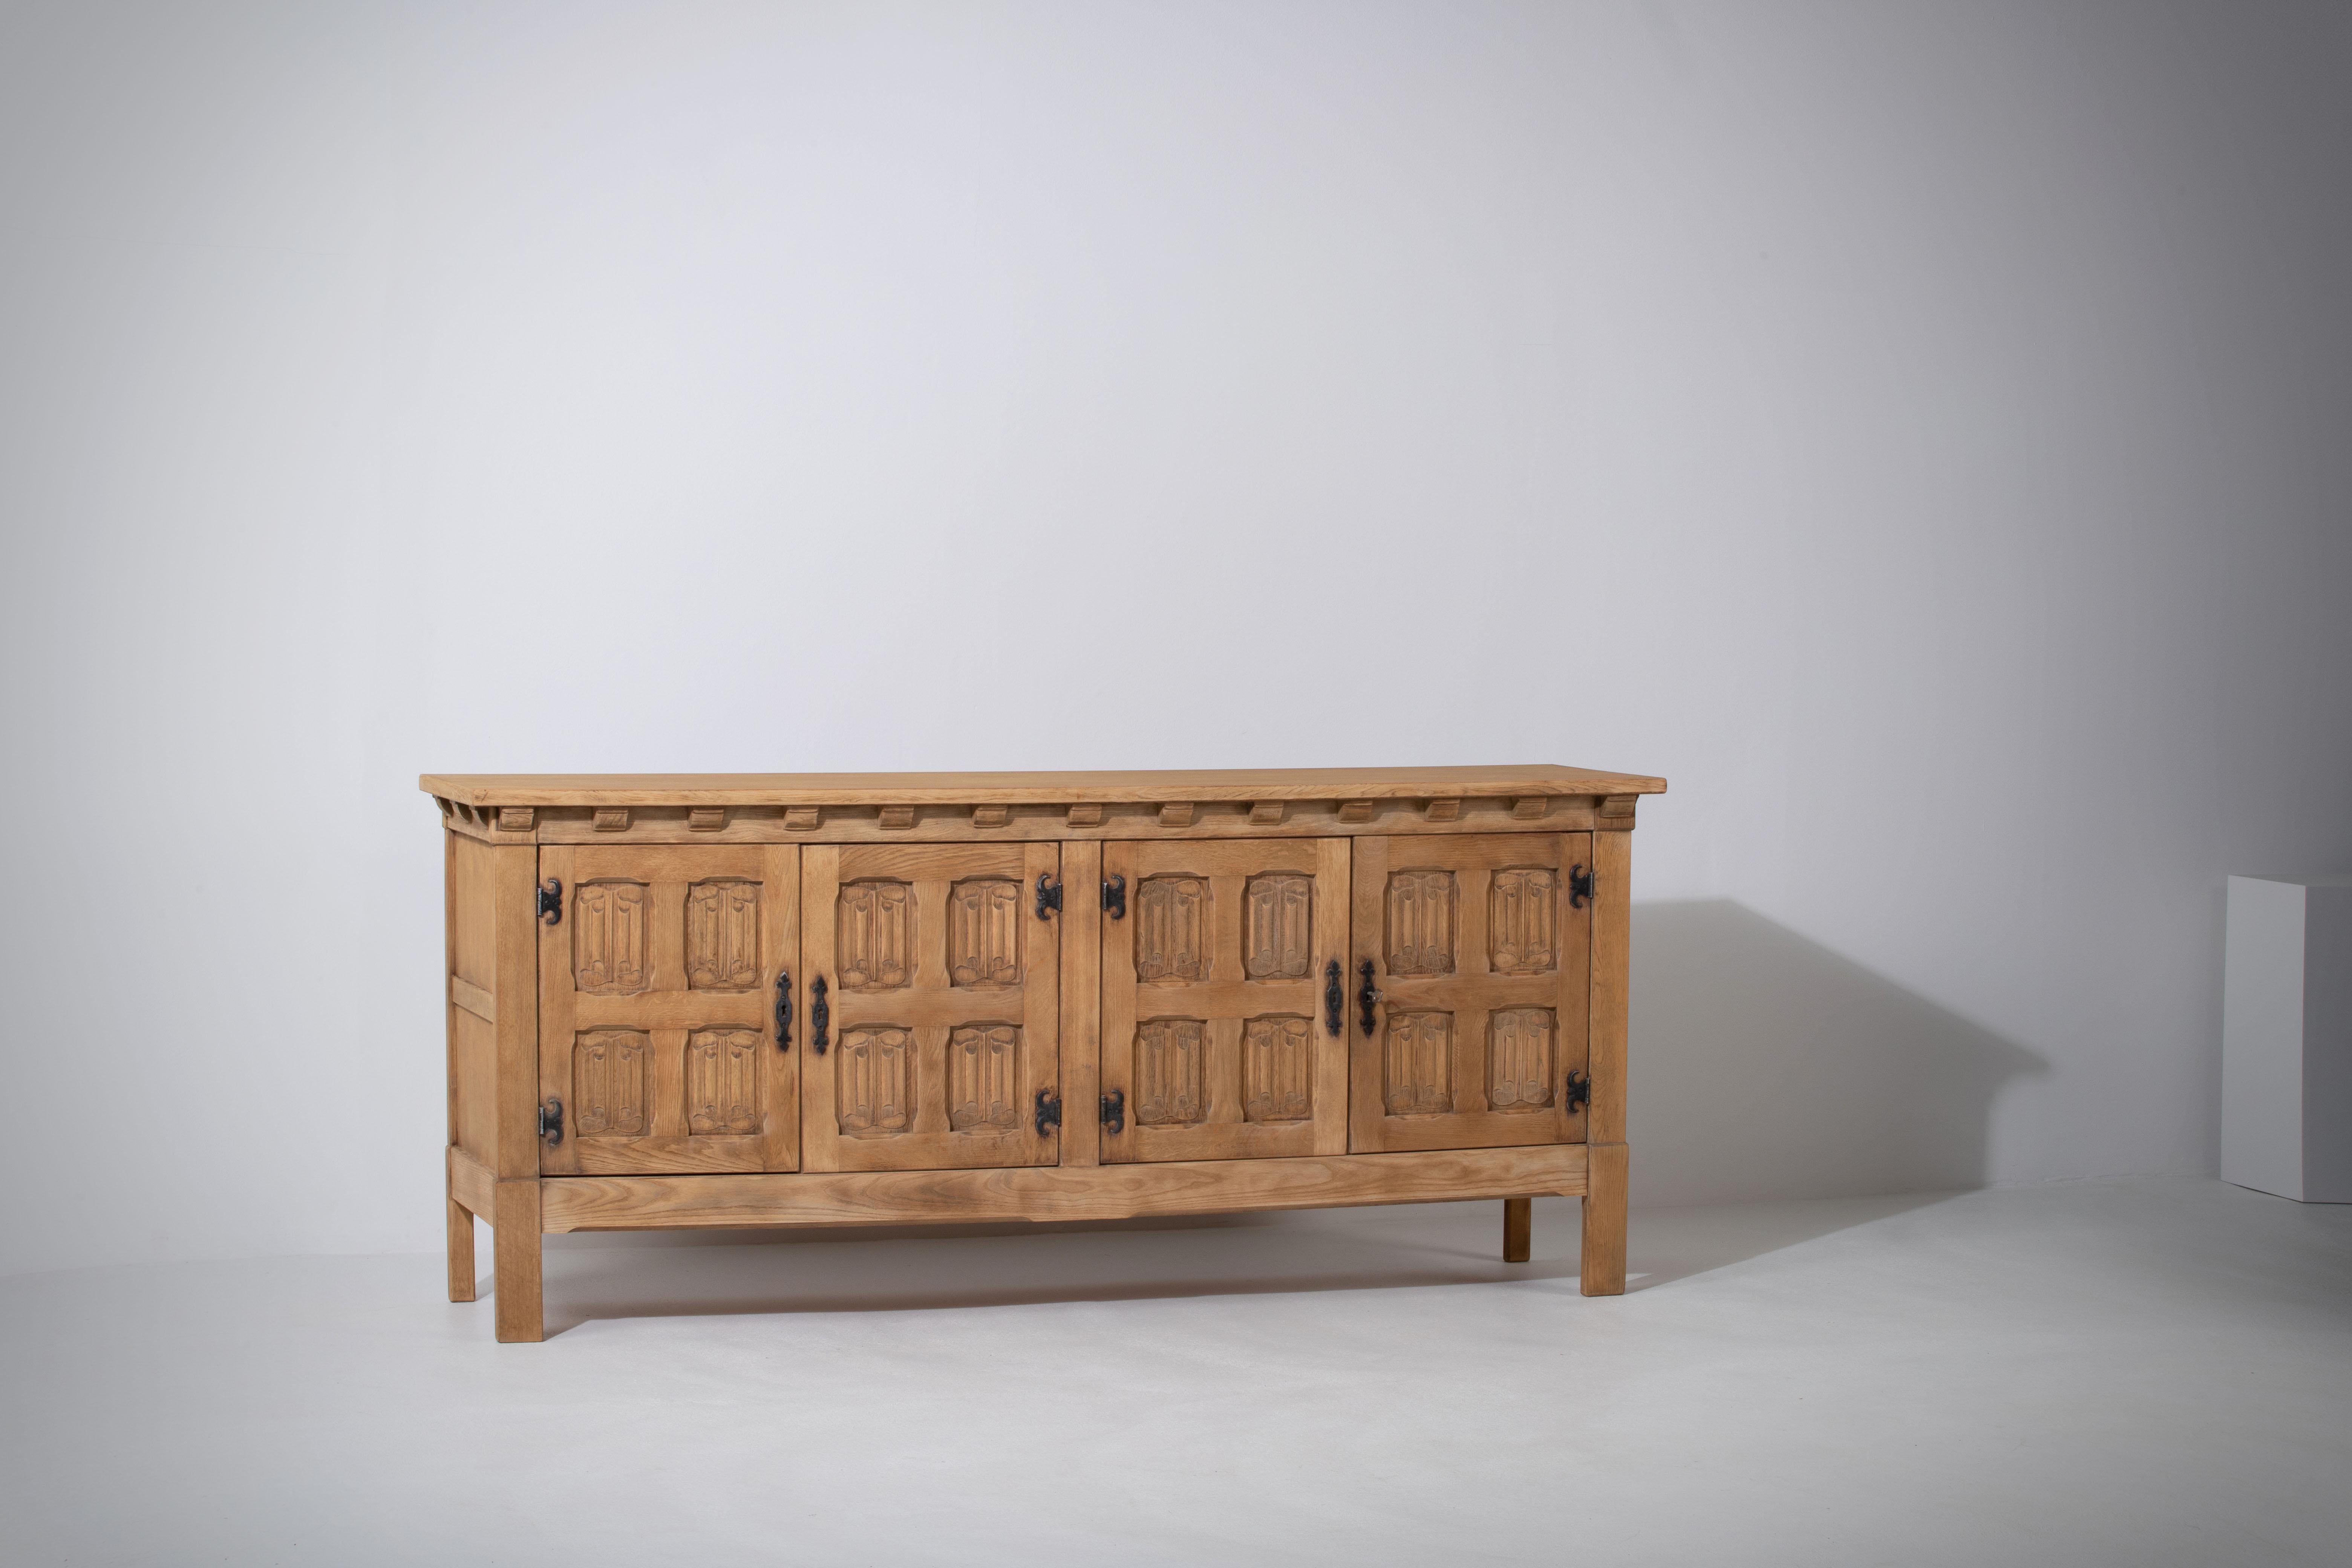 Introducing a captivating solid elm sideboard, reminiscent of the celebrated work of French designer duo Guillerme et Chambron or the legendary Charlotte Perriand. This elegant cabinet effortlessly combines rustic country style with minimalism,